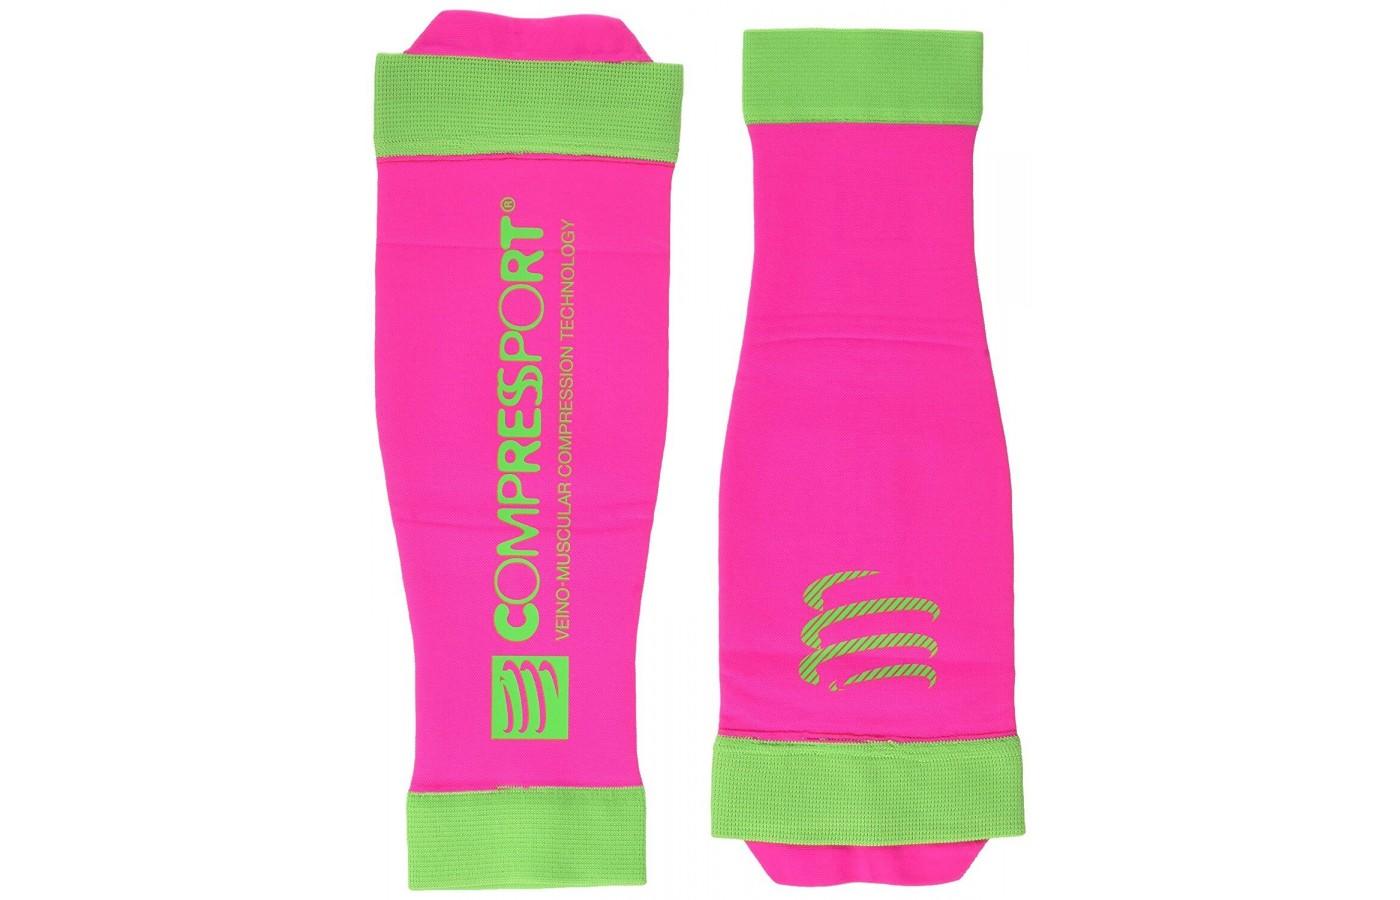 The Compresssport Calf Sleeves come in an array of colors